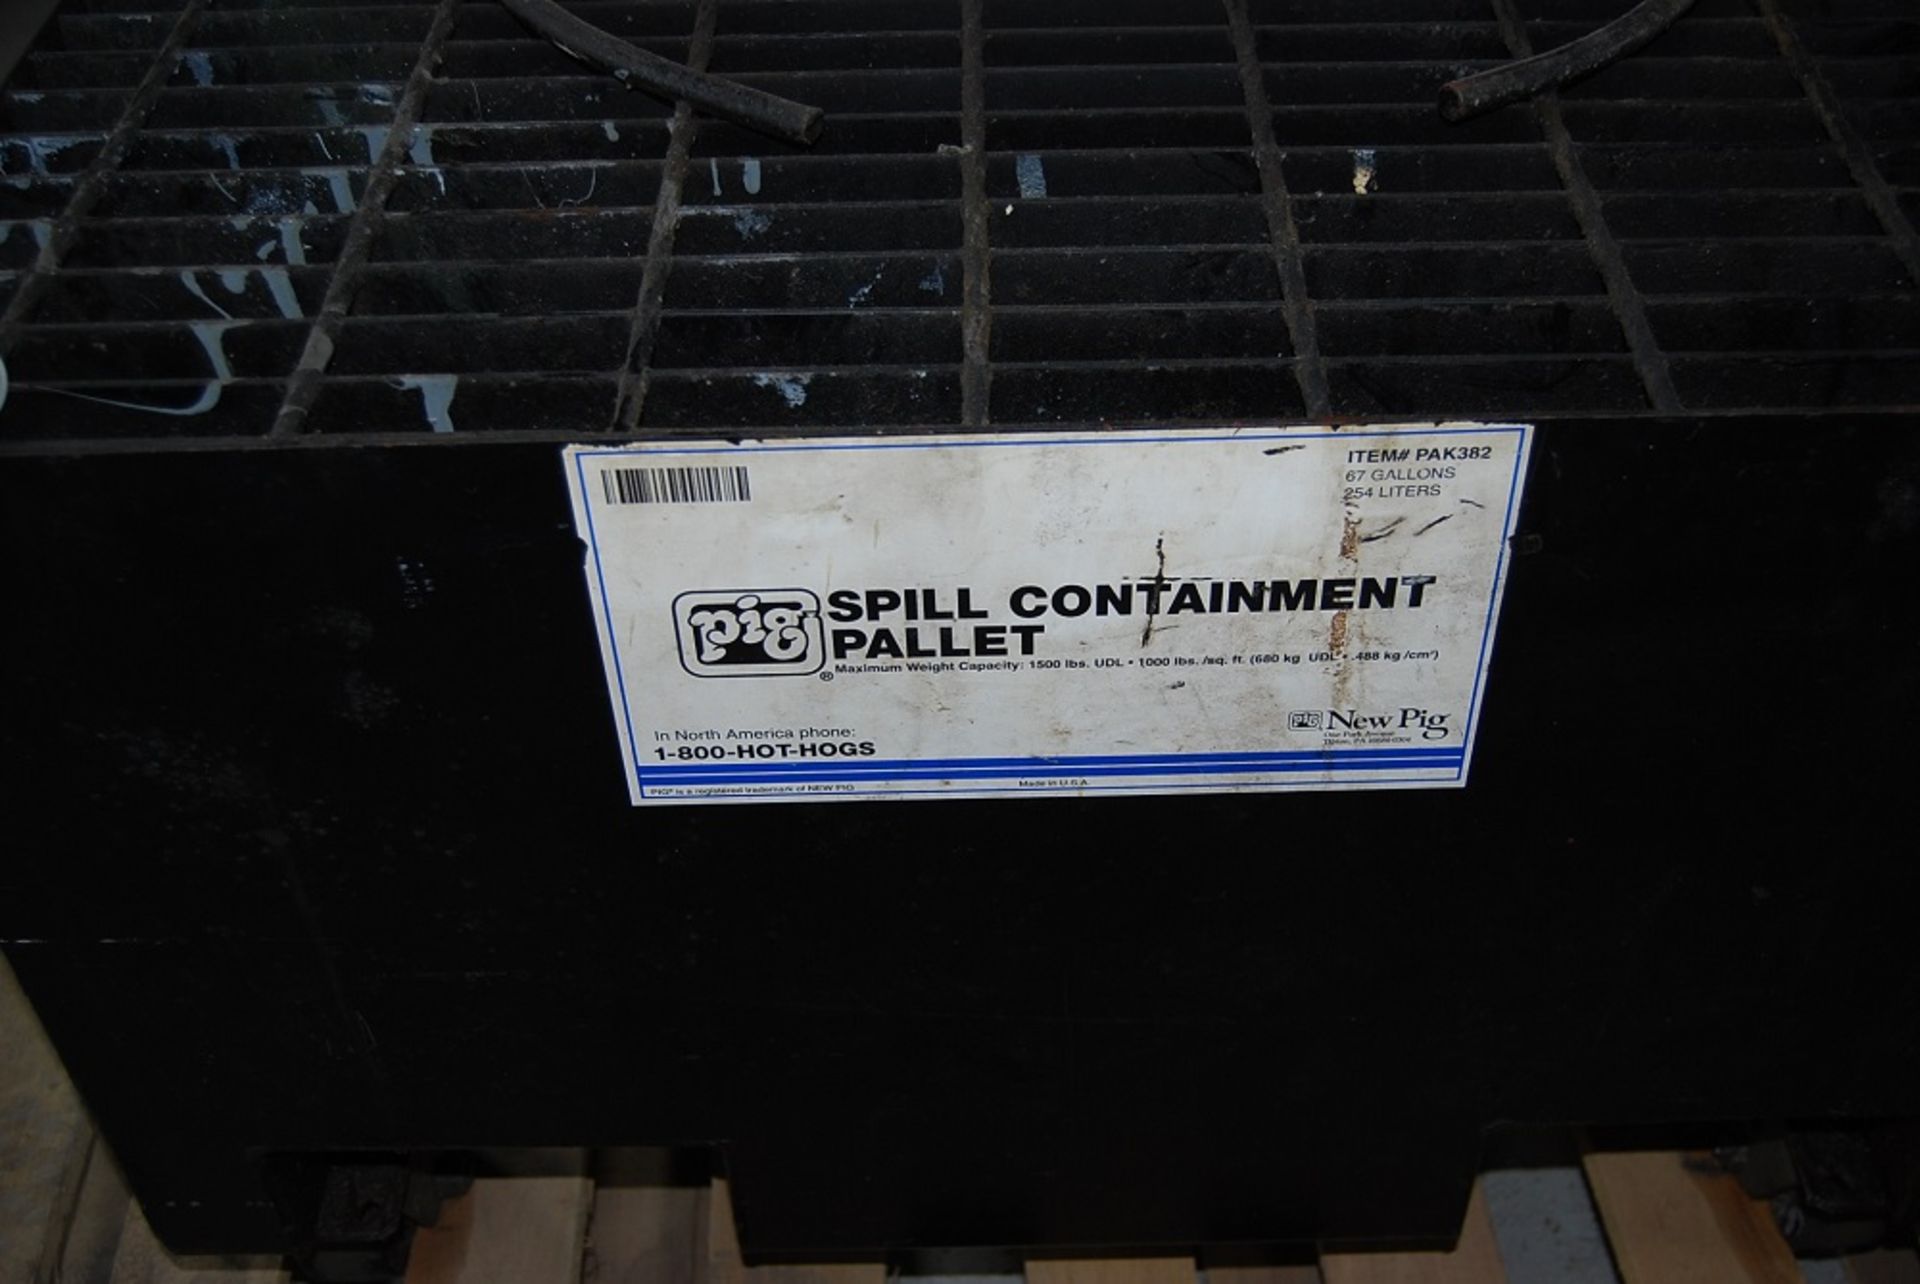 New Pig Spill Containment Pallet, Foot Print: 32.5" x 32.5" x 23" tall on casters - Image 3 of 6